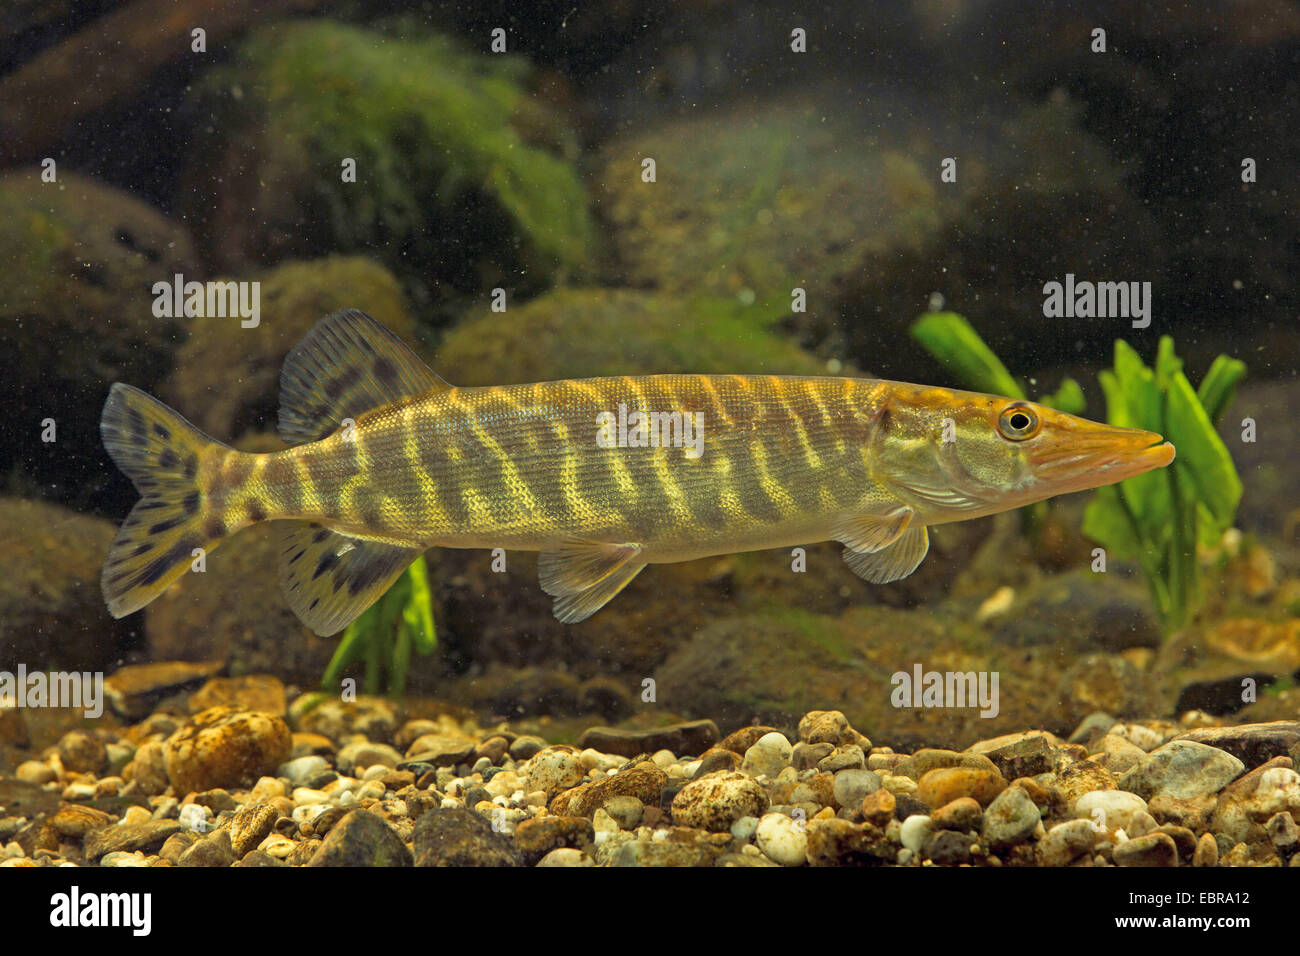 pike, northern pike (Esox lucius), swimming, Germany Stock Photo